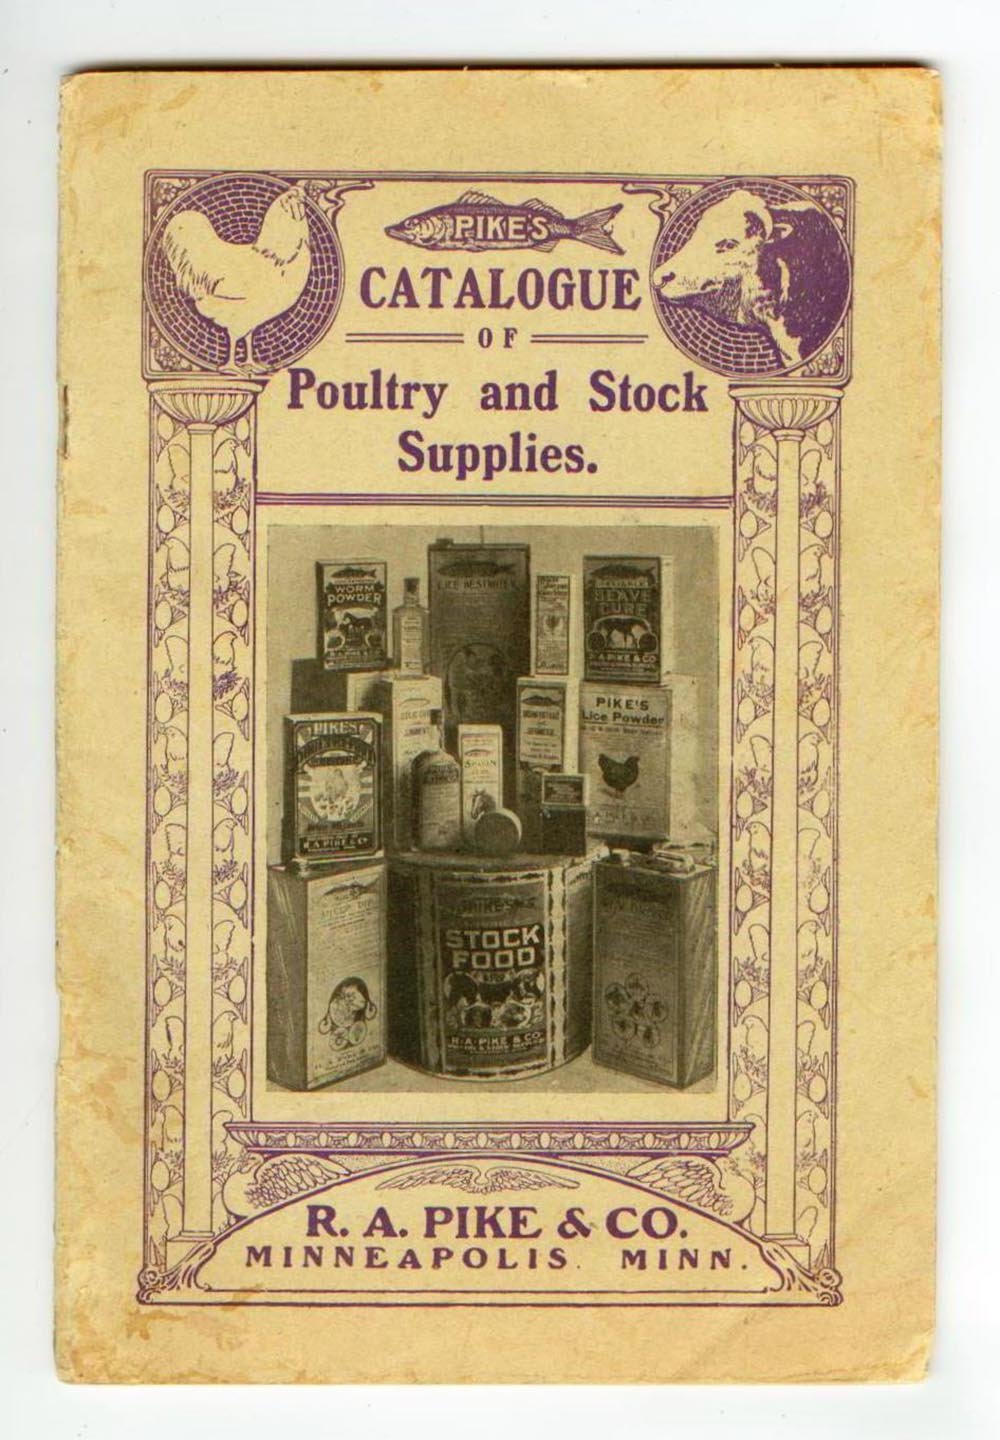 Pike's Catalogue of Poultry and Stock Supplies